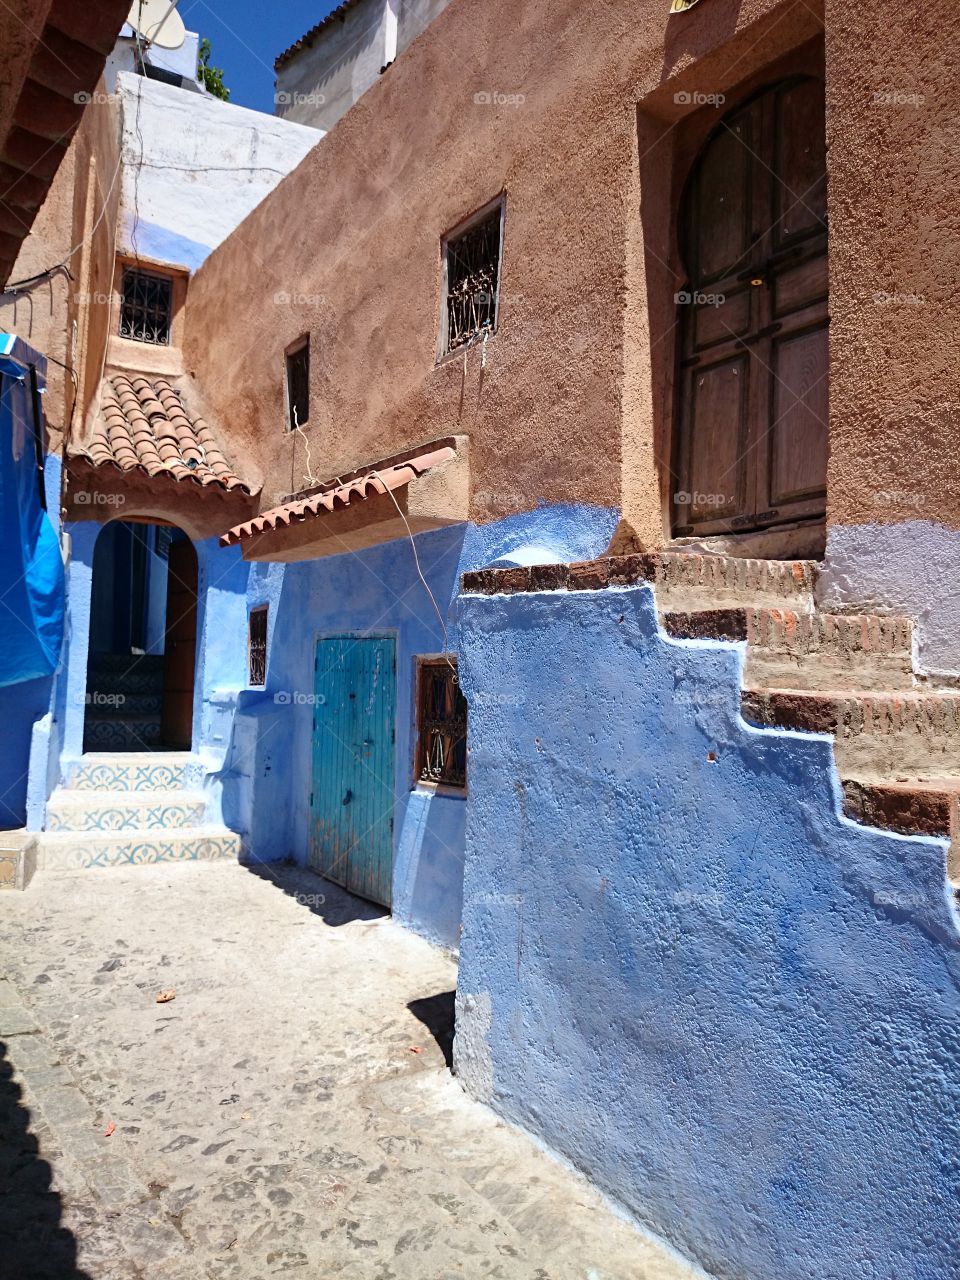 Street along with houses in Chefchaouen city